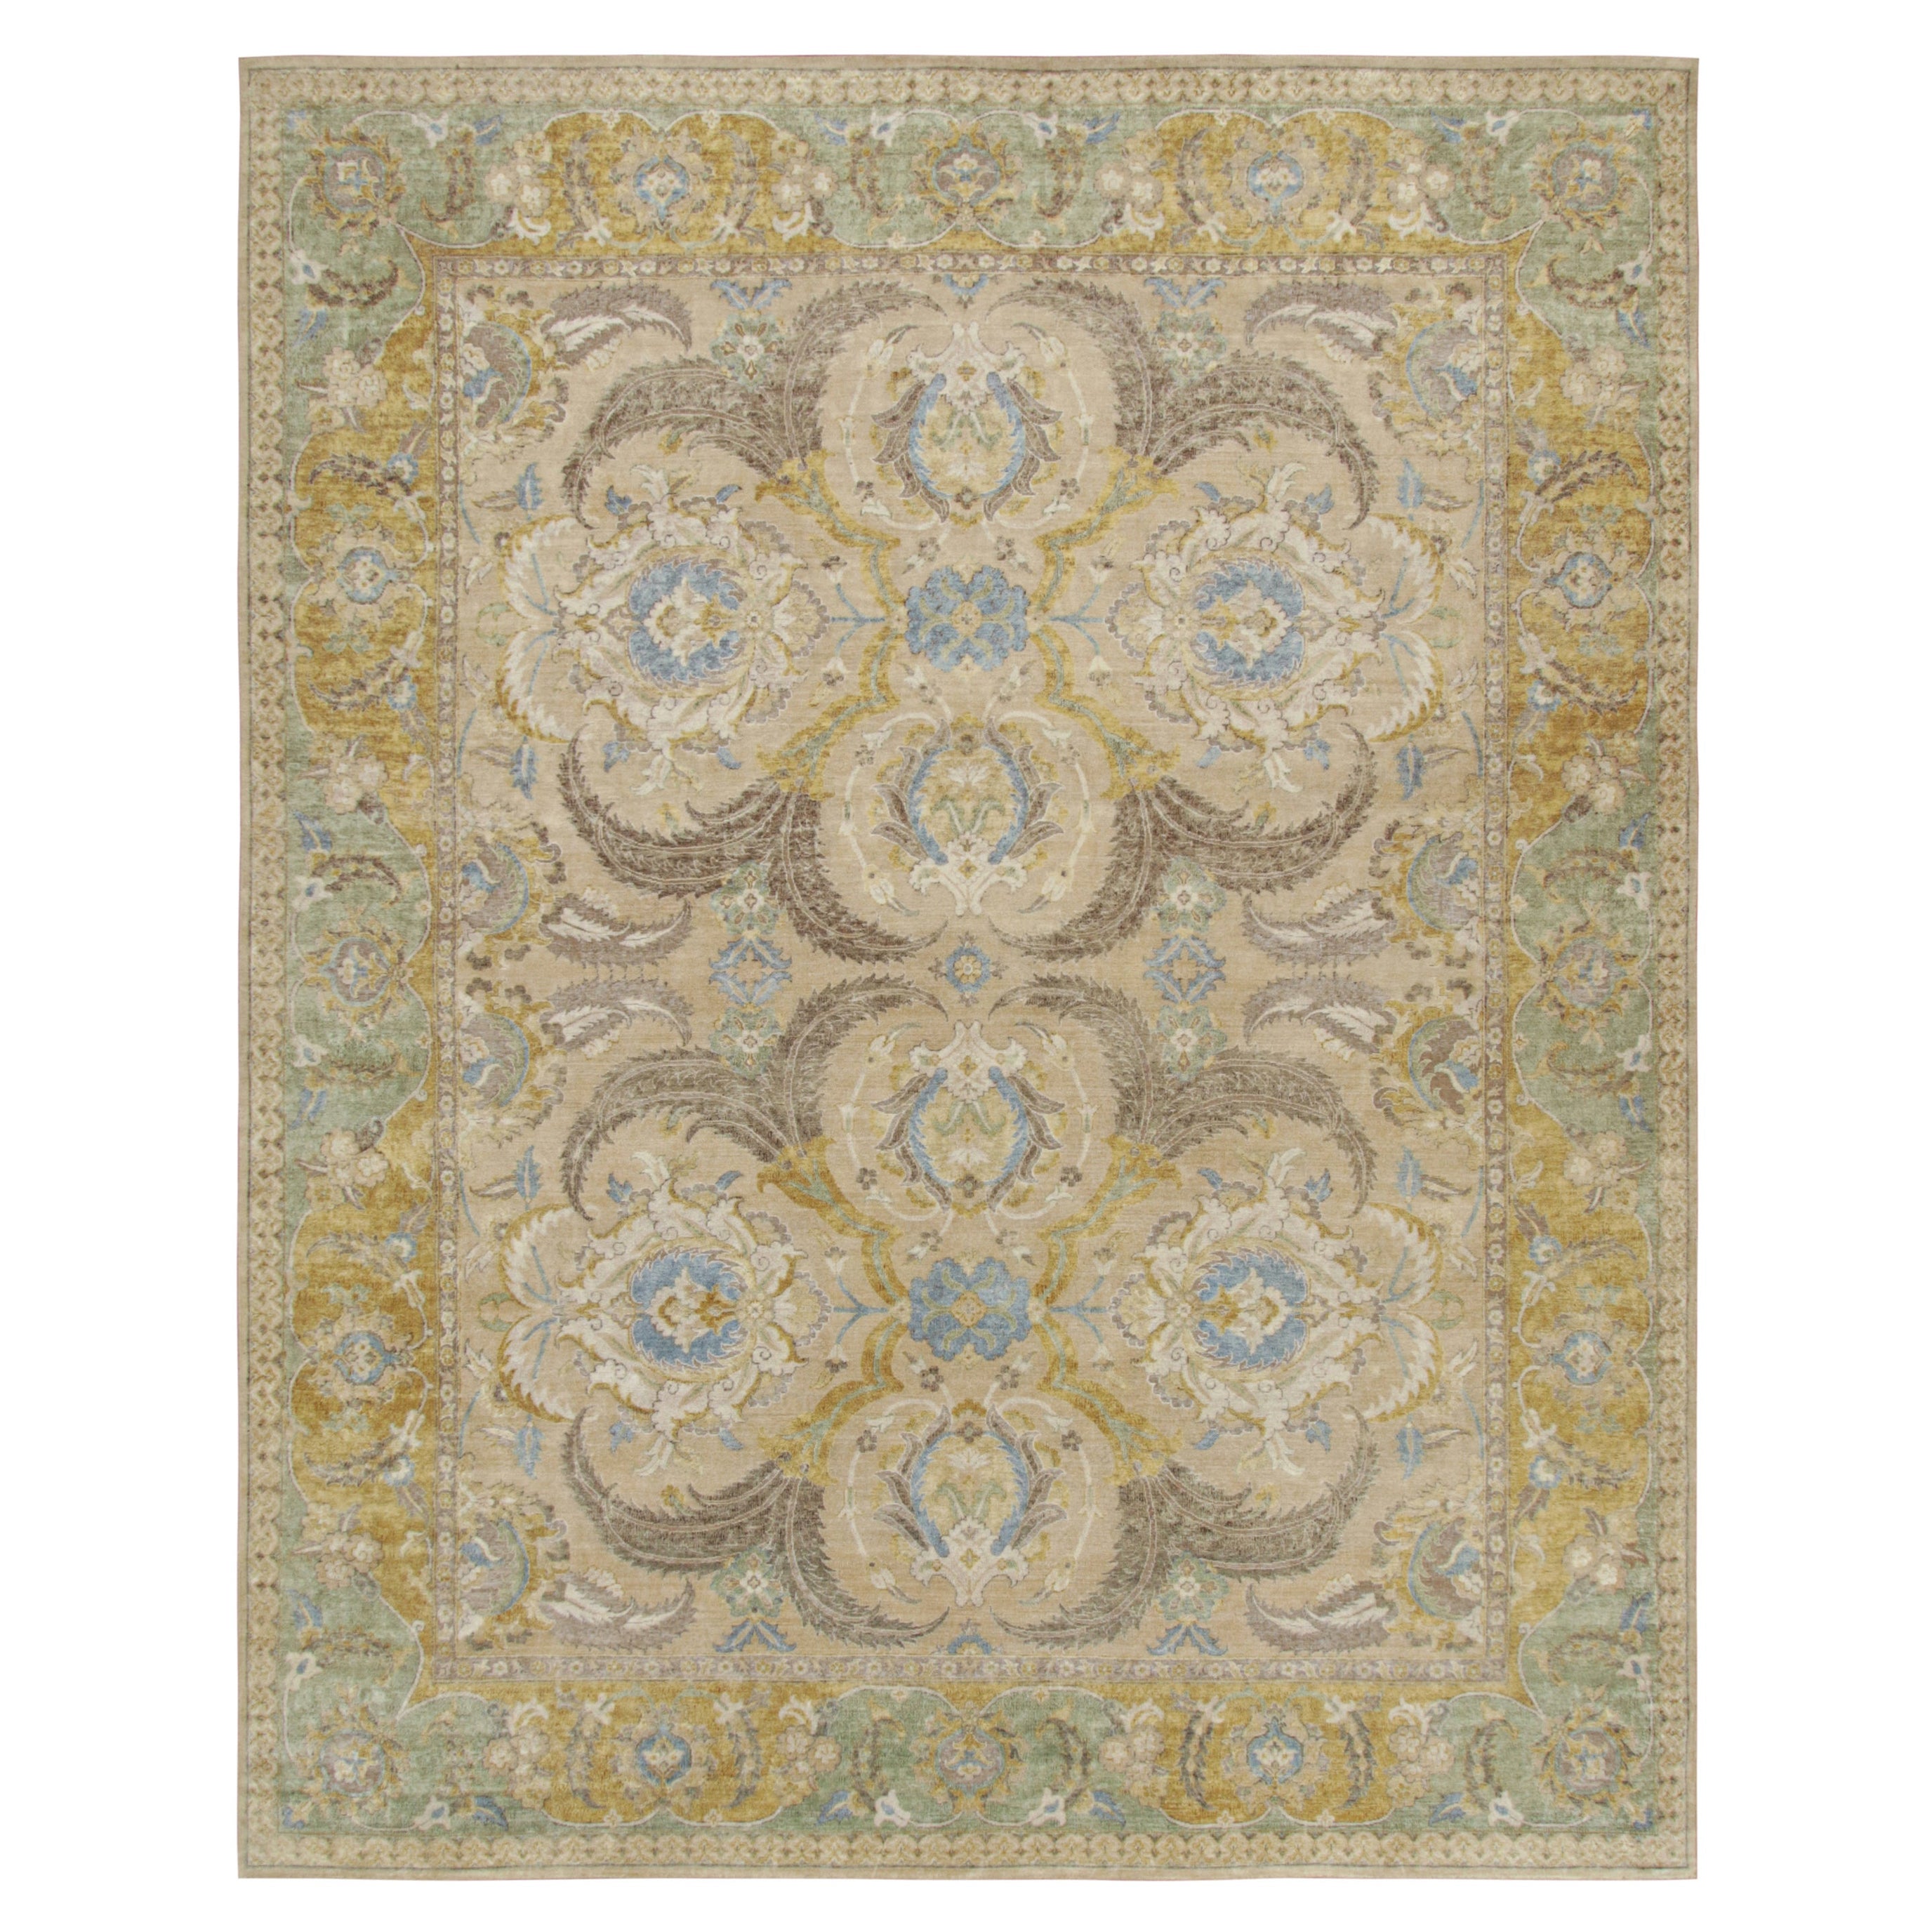 Rug & Kilim’s Polonaise Style rug in Beige with Gold and Blue Floral Patterns